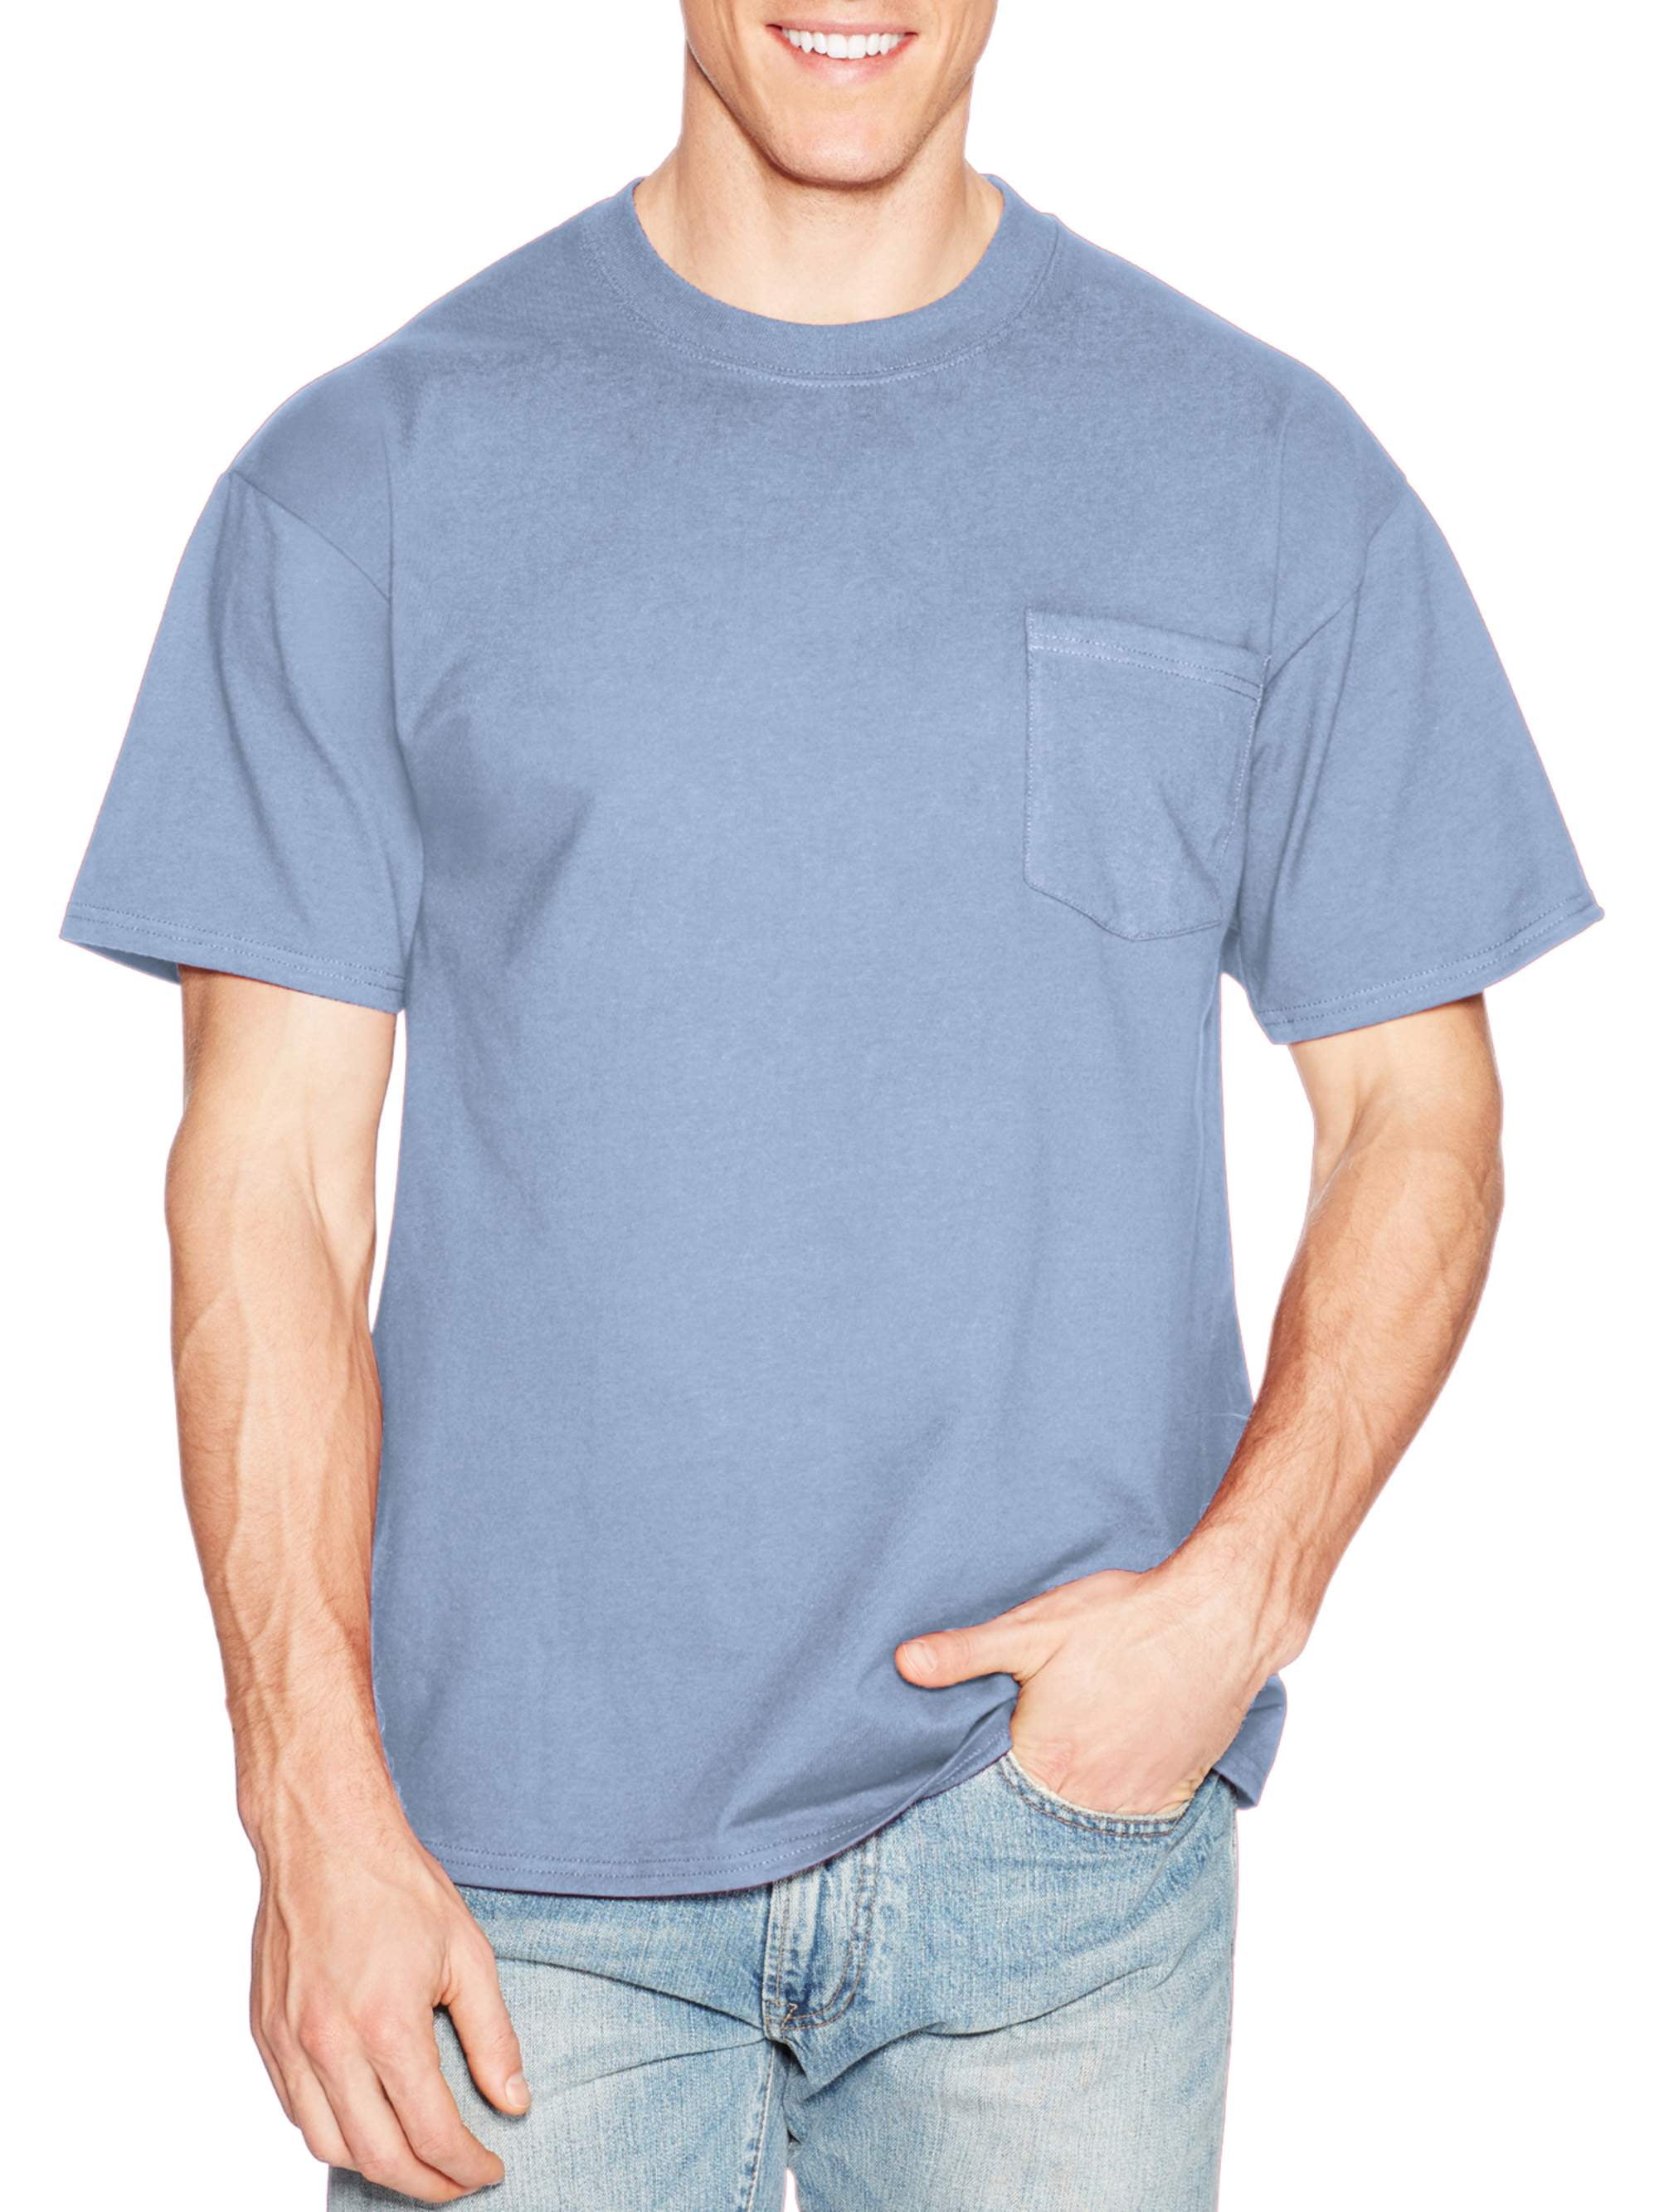 Hanes Mens Premium Beefy-T Cotton Short Sleeve T-Shirt with Pocket ...